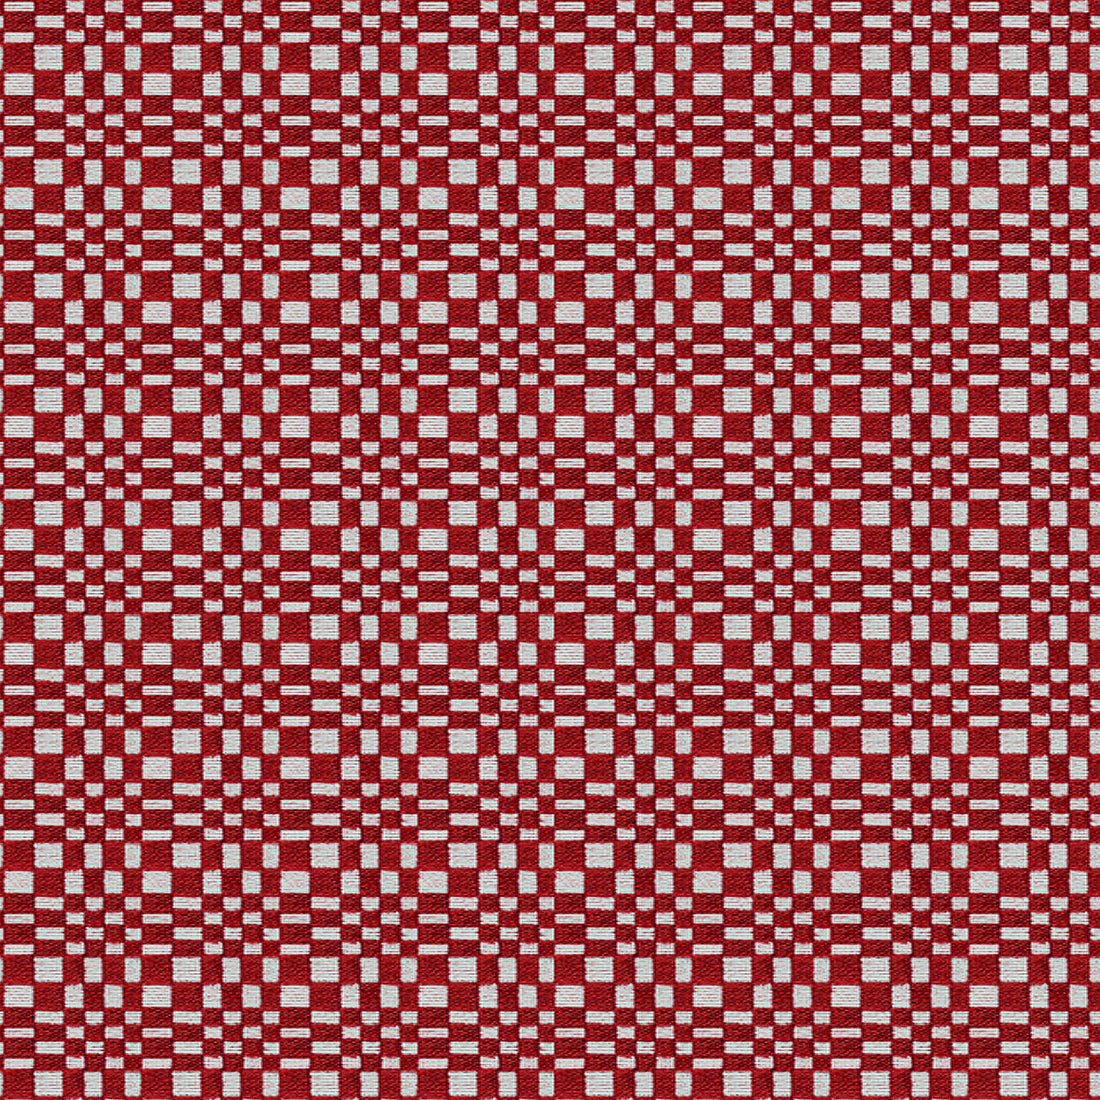 Santa Eulalia fabric in rojo color - pattern GDT5686.002.0 - by Gaston y Daniela in the Gaston Maiorica collection